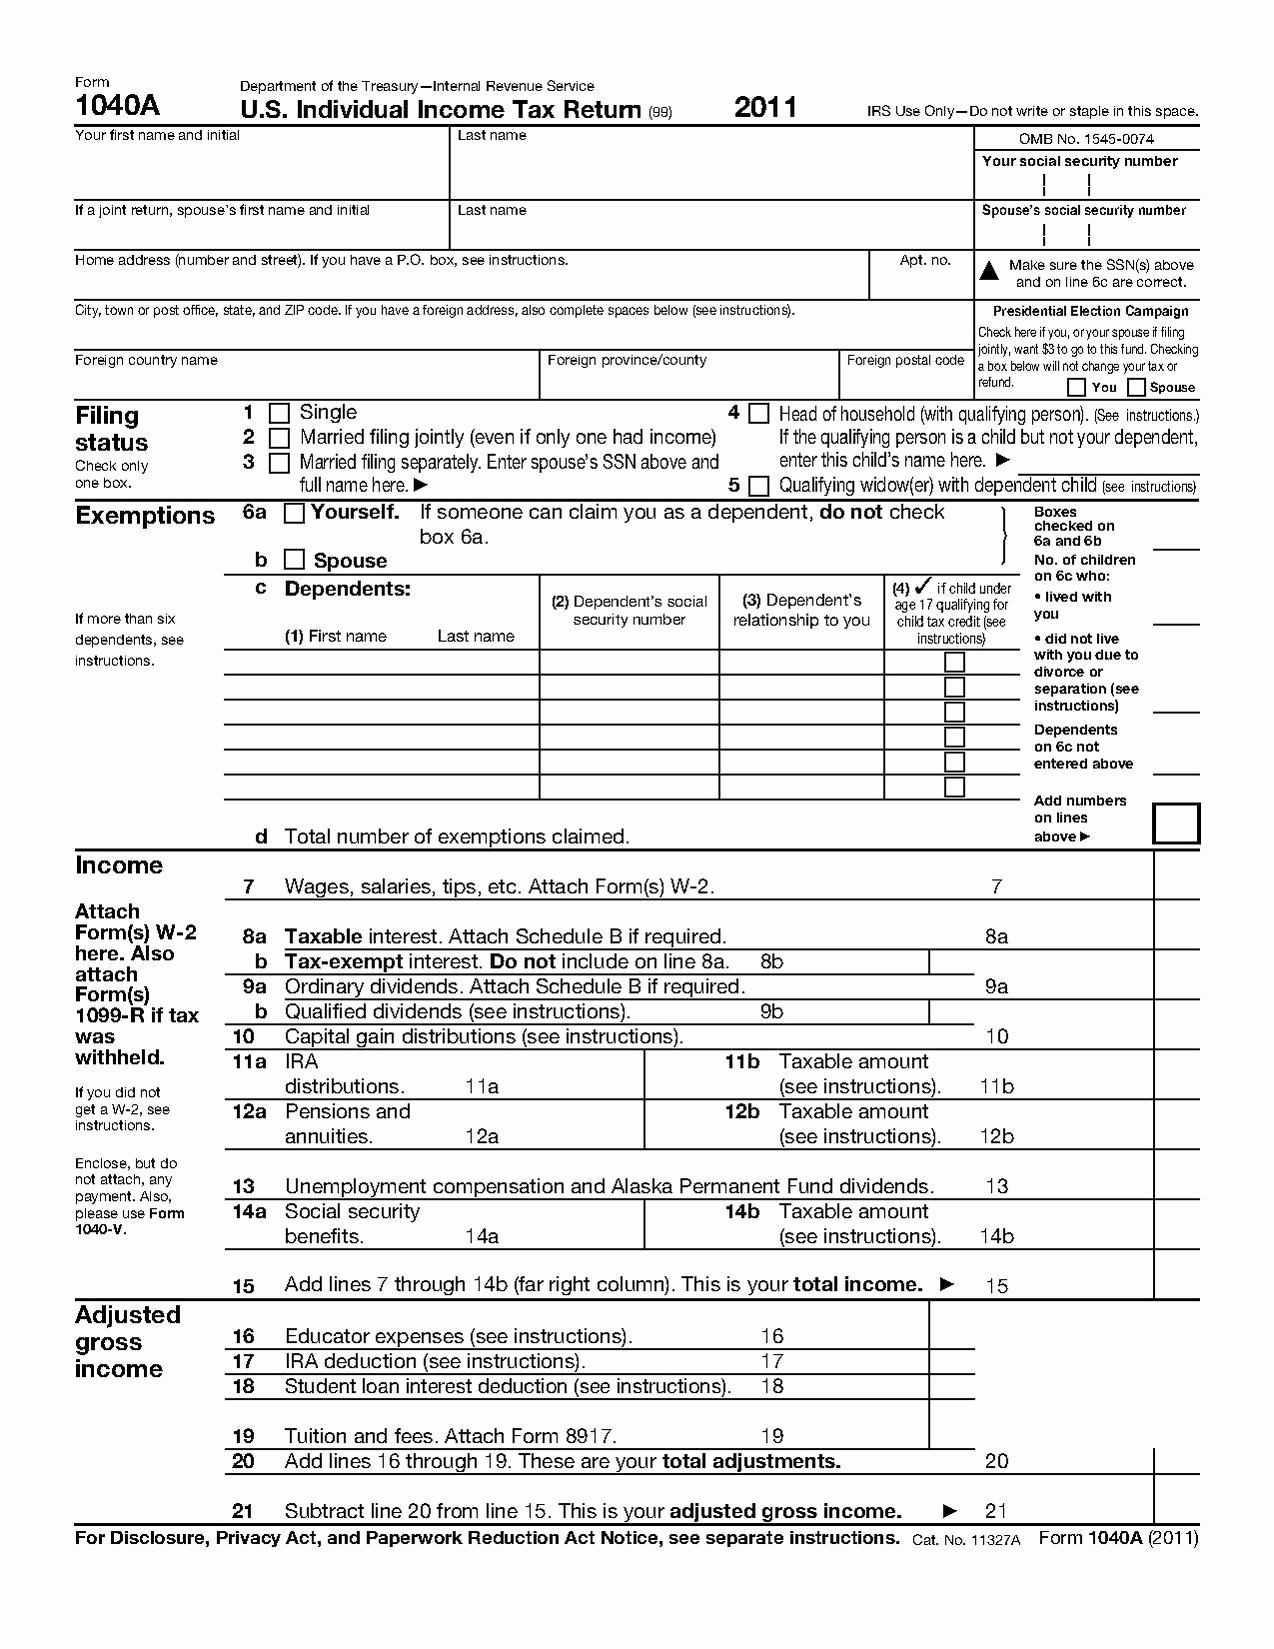 Qualified Dividends and Capital Gain Tax Worksheet 2016 together with social Security Benefits Worksheet 2016 Awesome Tax Itemization